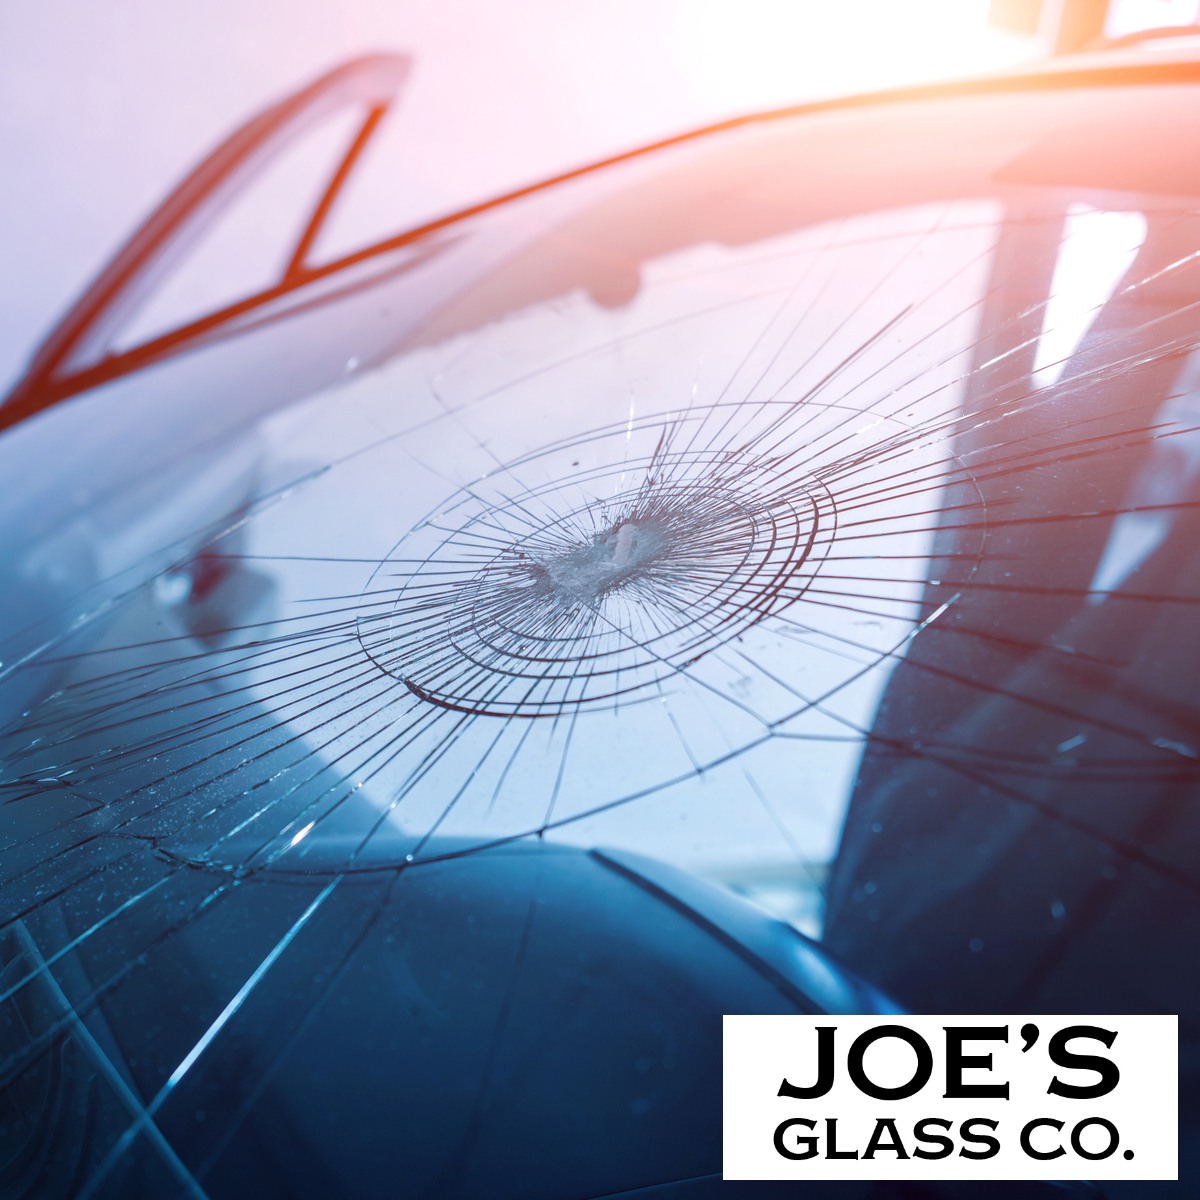 Glass Cracked in a Fender Bender? Call on Joe’s Glass Co. for Repair and Replacement of Your Auto Glass!